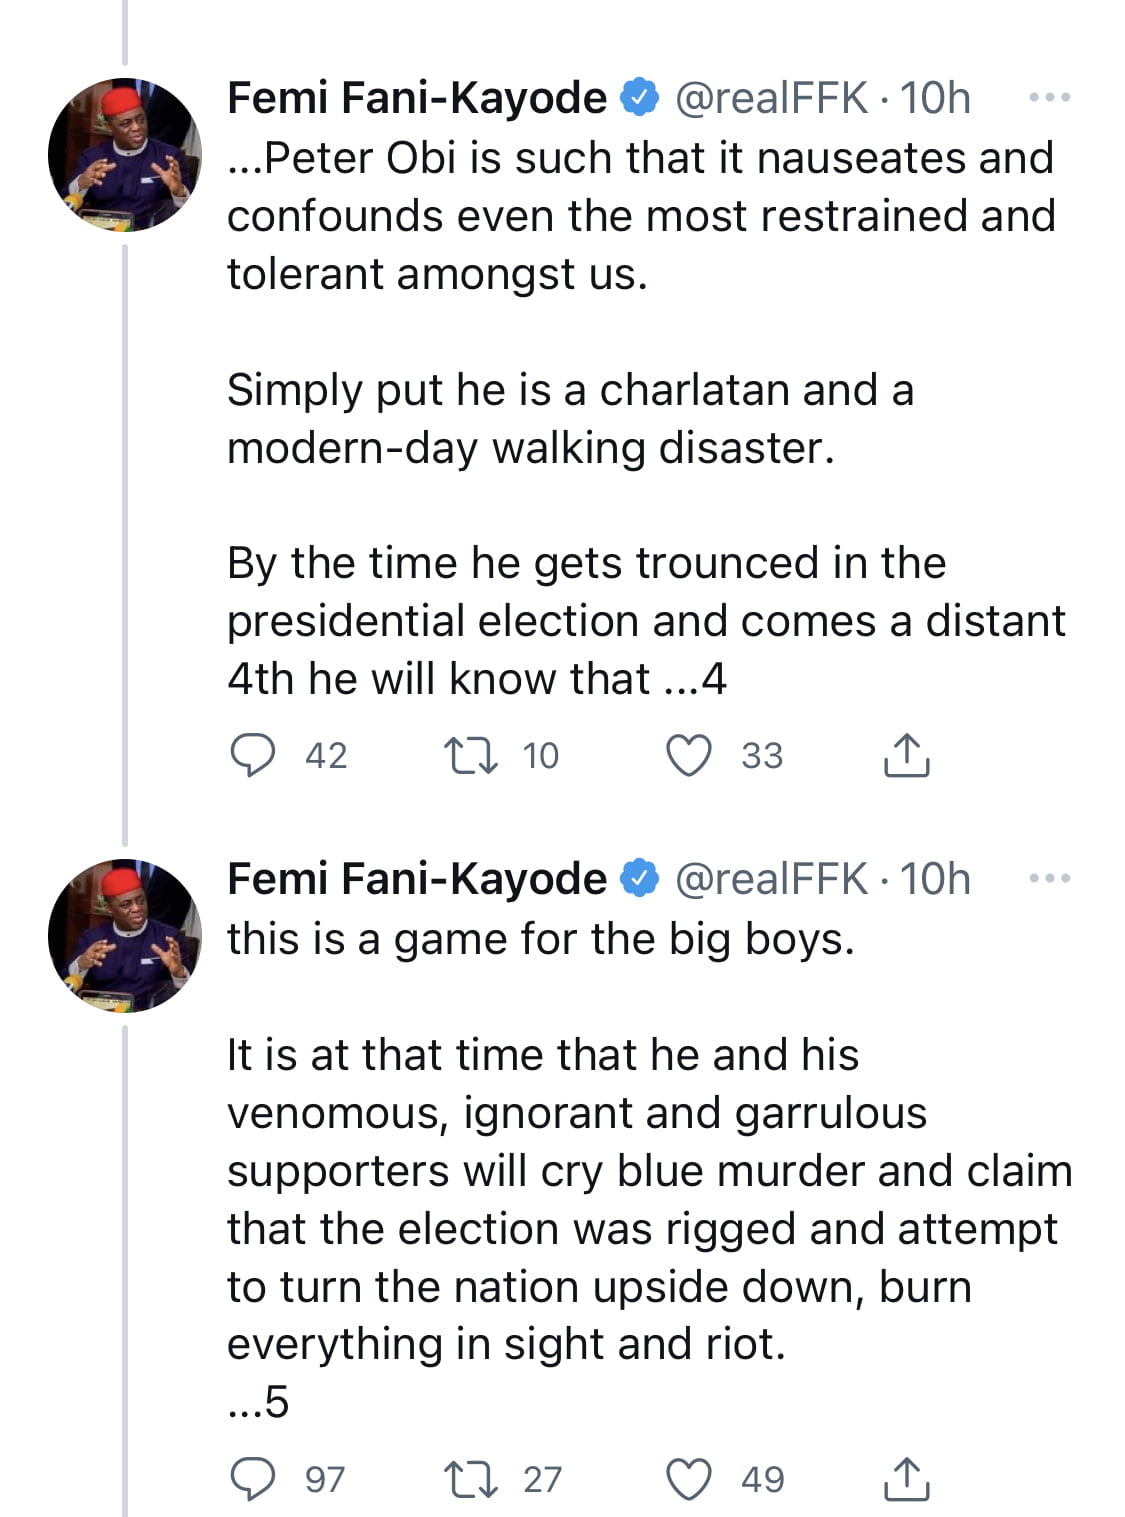 You are a mannerless dunce with low self esteem - FFK Carpets Peter Obi for ignoring him